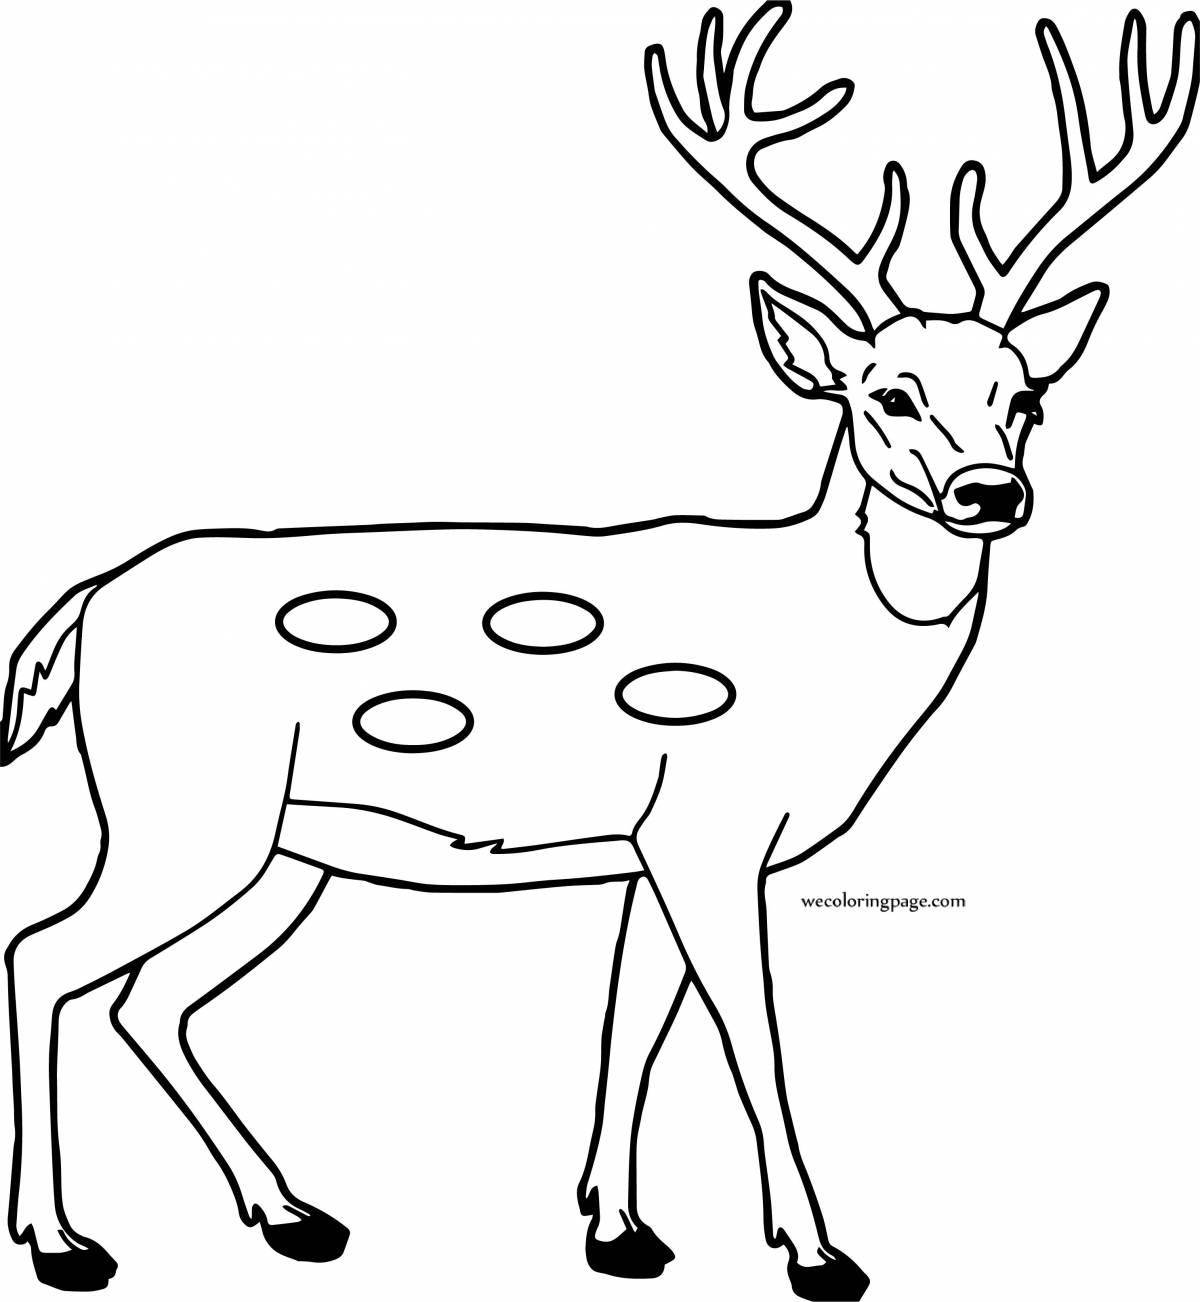 Gorgeous deer coloring for kids